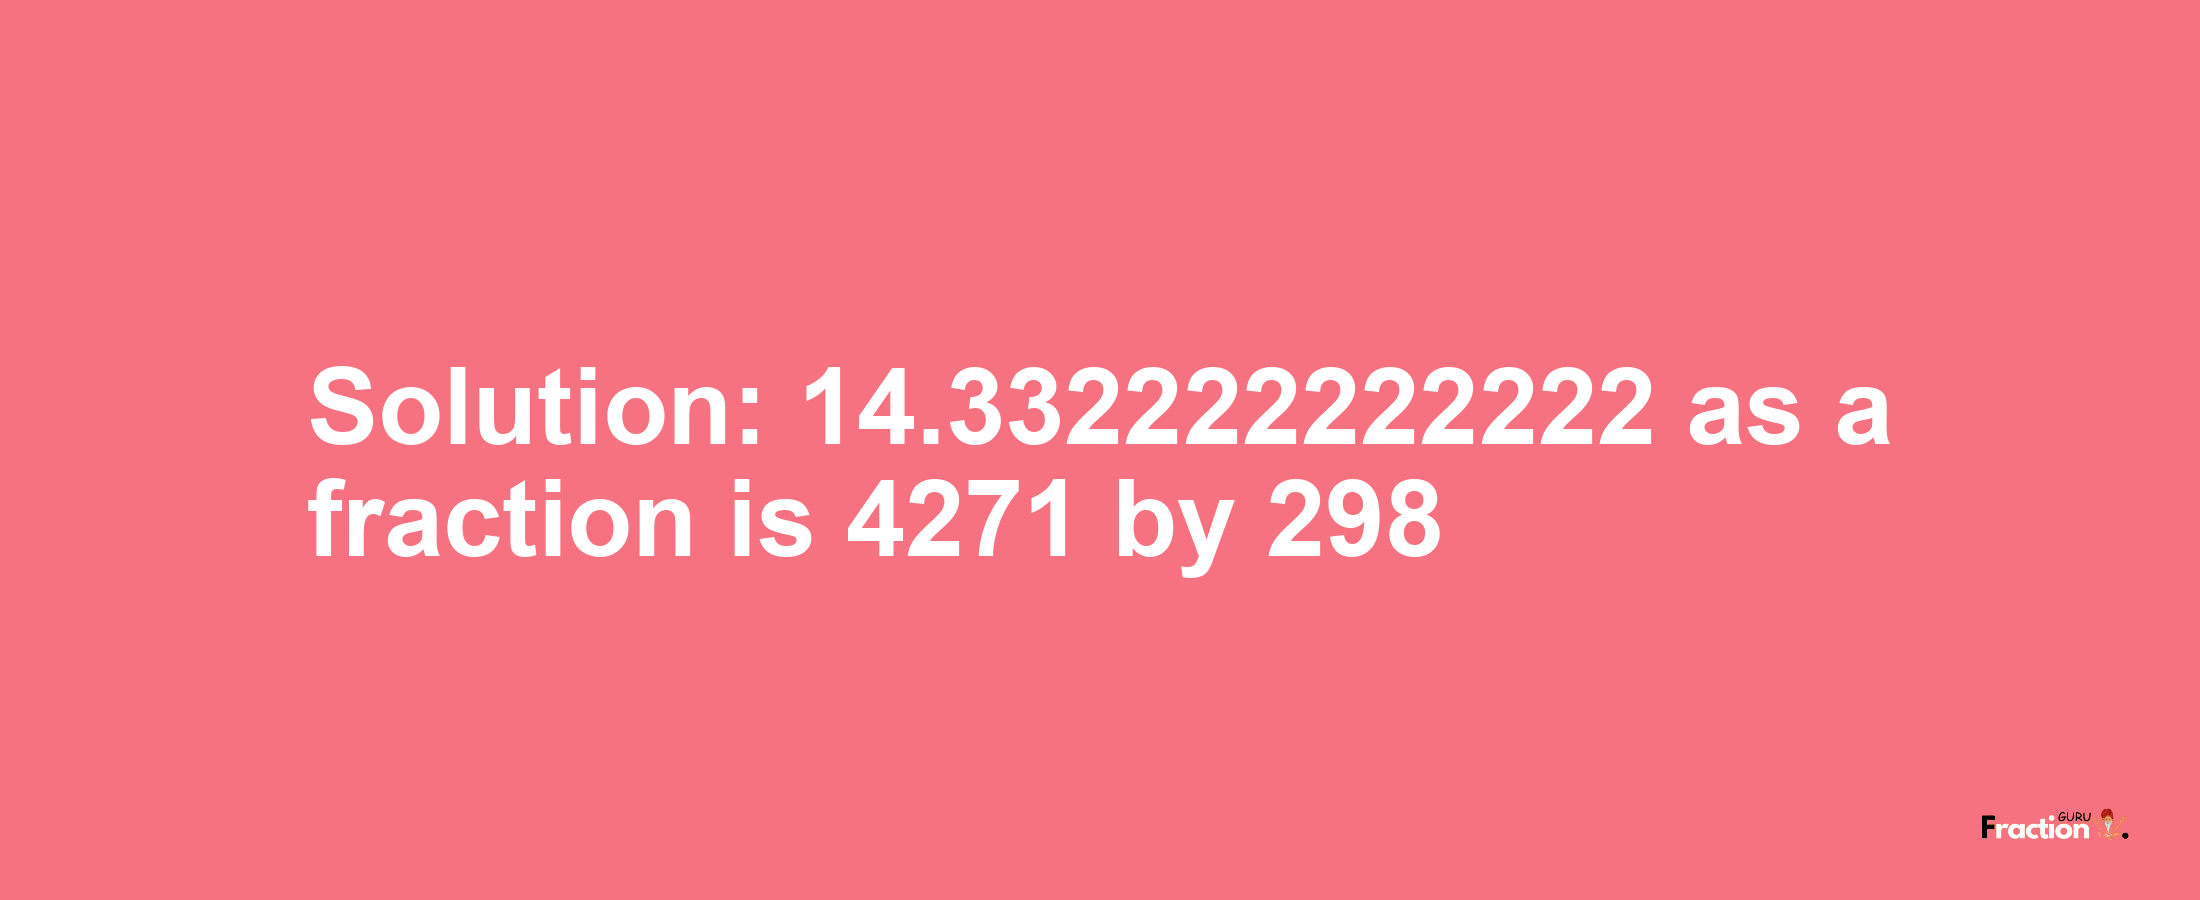 Solution:14.332222222222 as a fraction is 4271/298